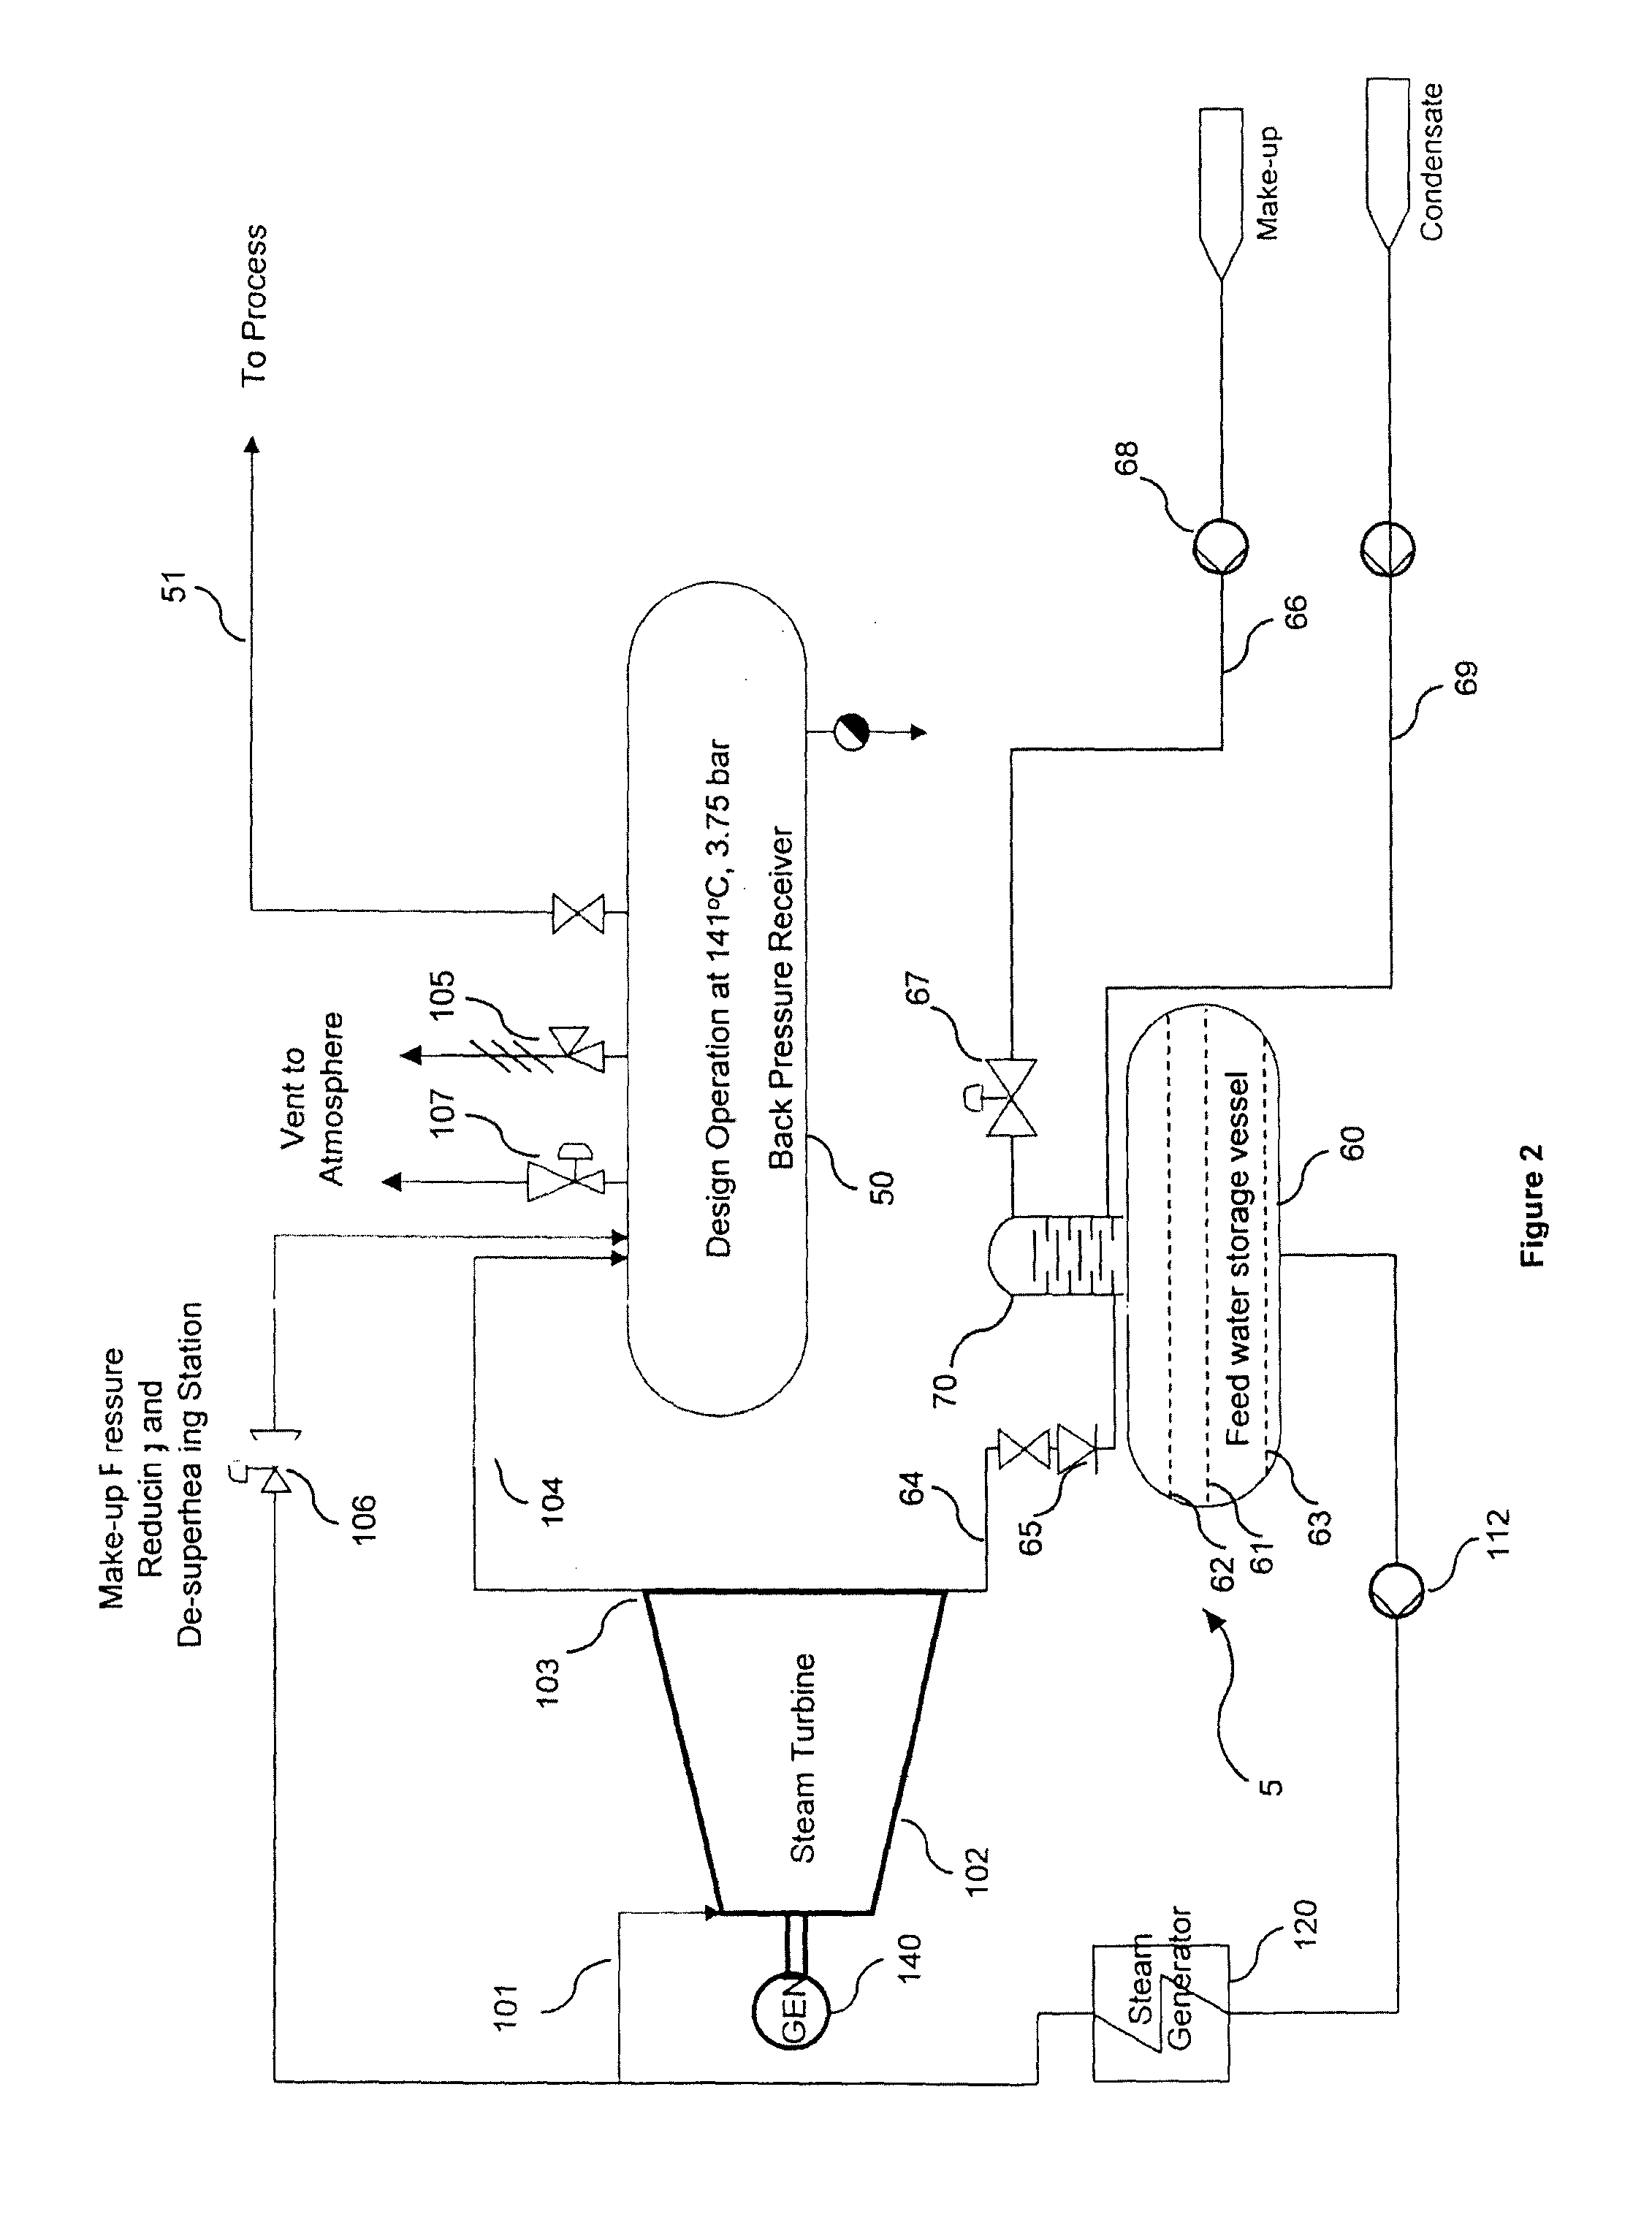 Method and apparatus of producing and utilizing thermal energy in a combined heat and power plant